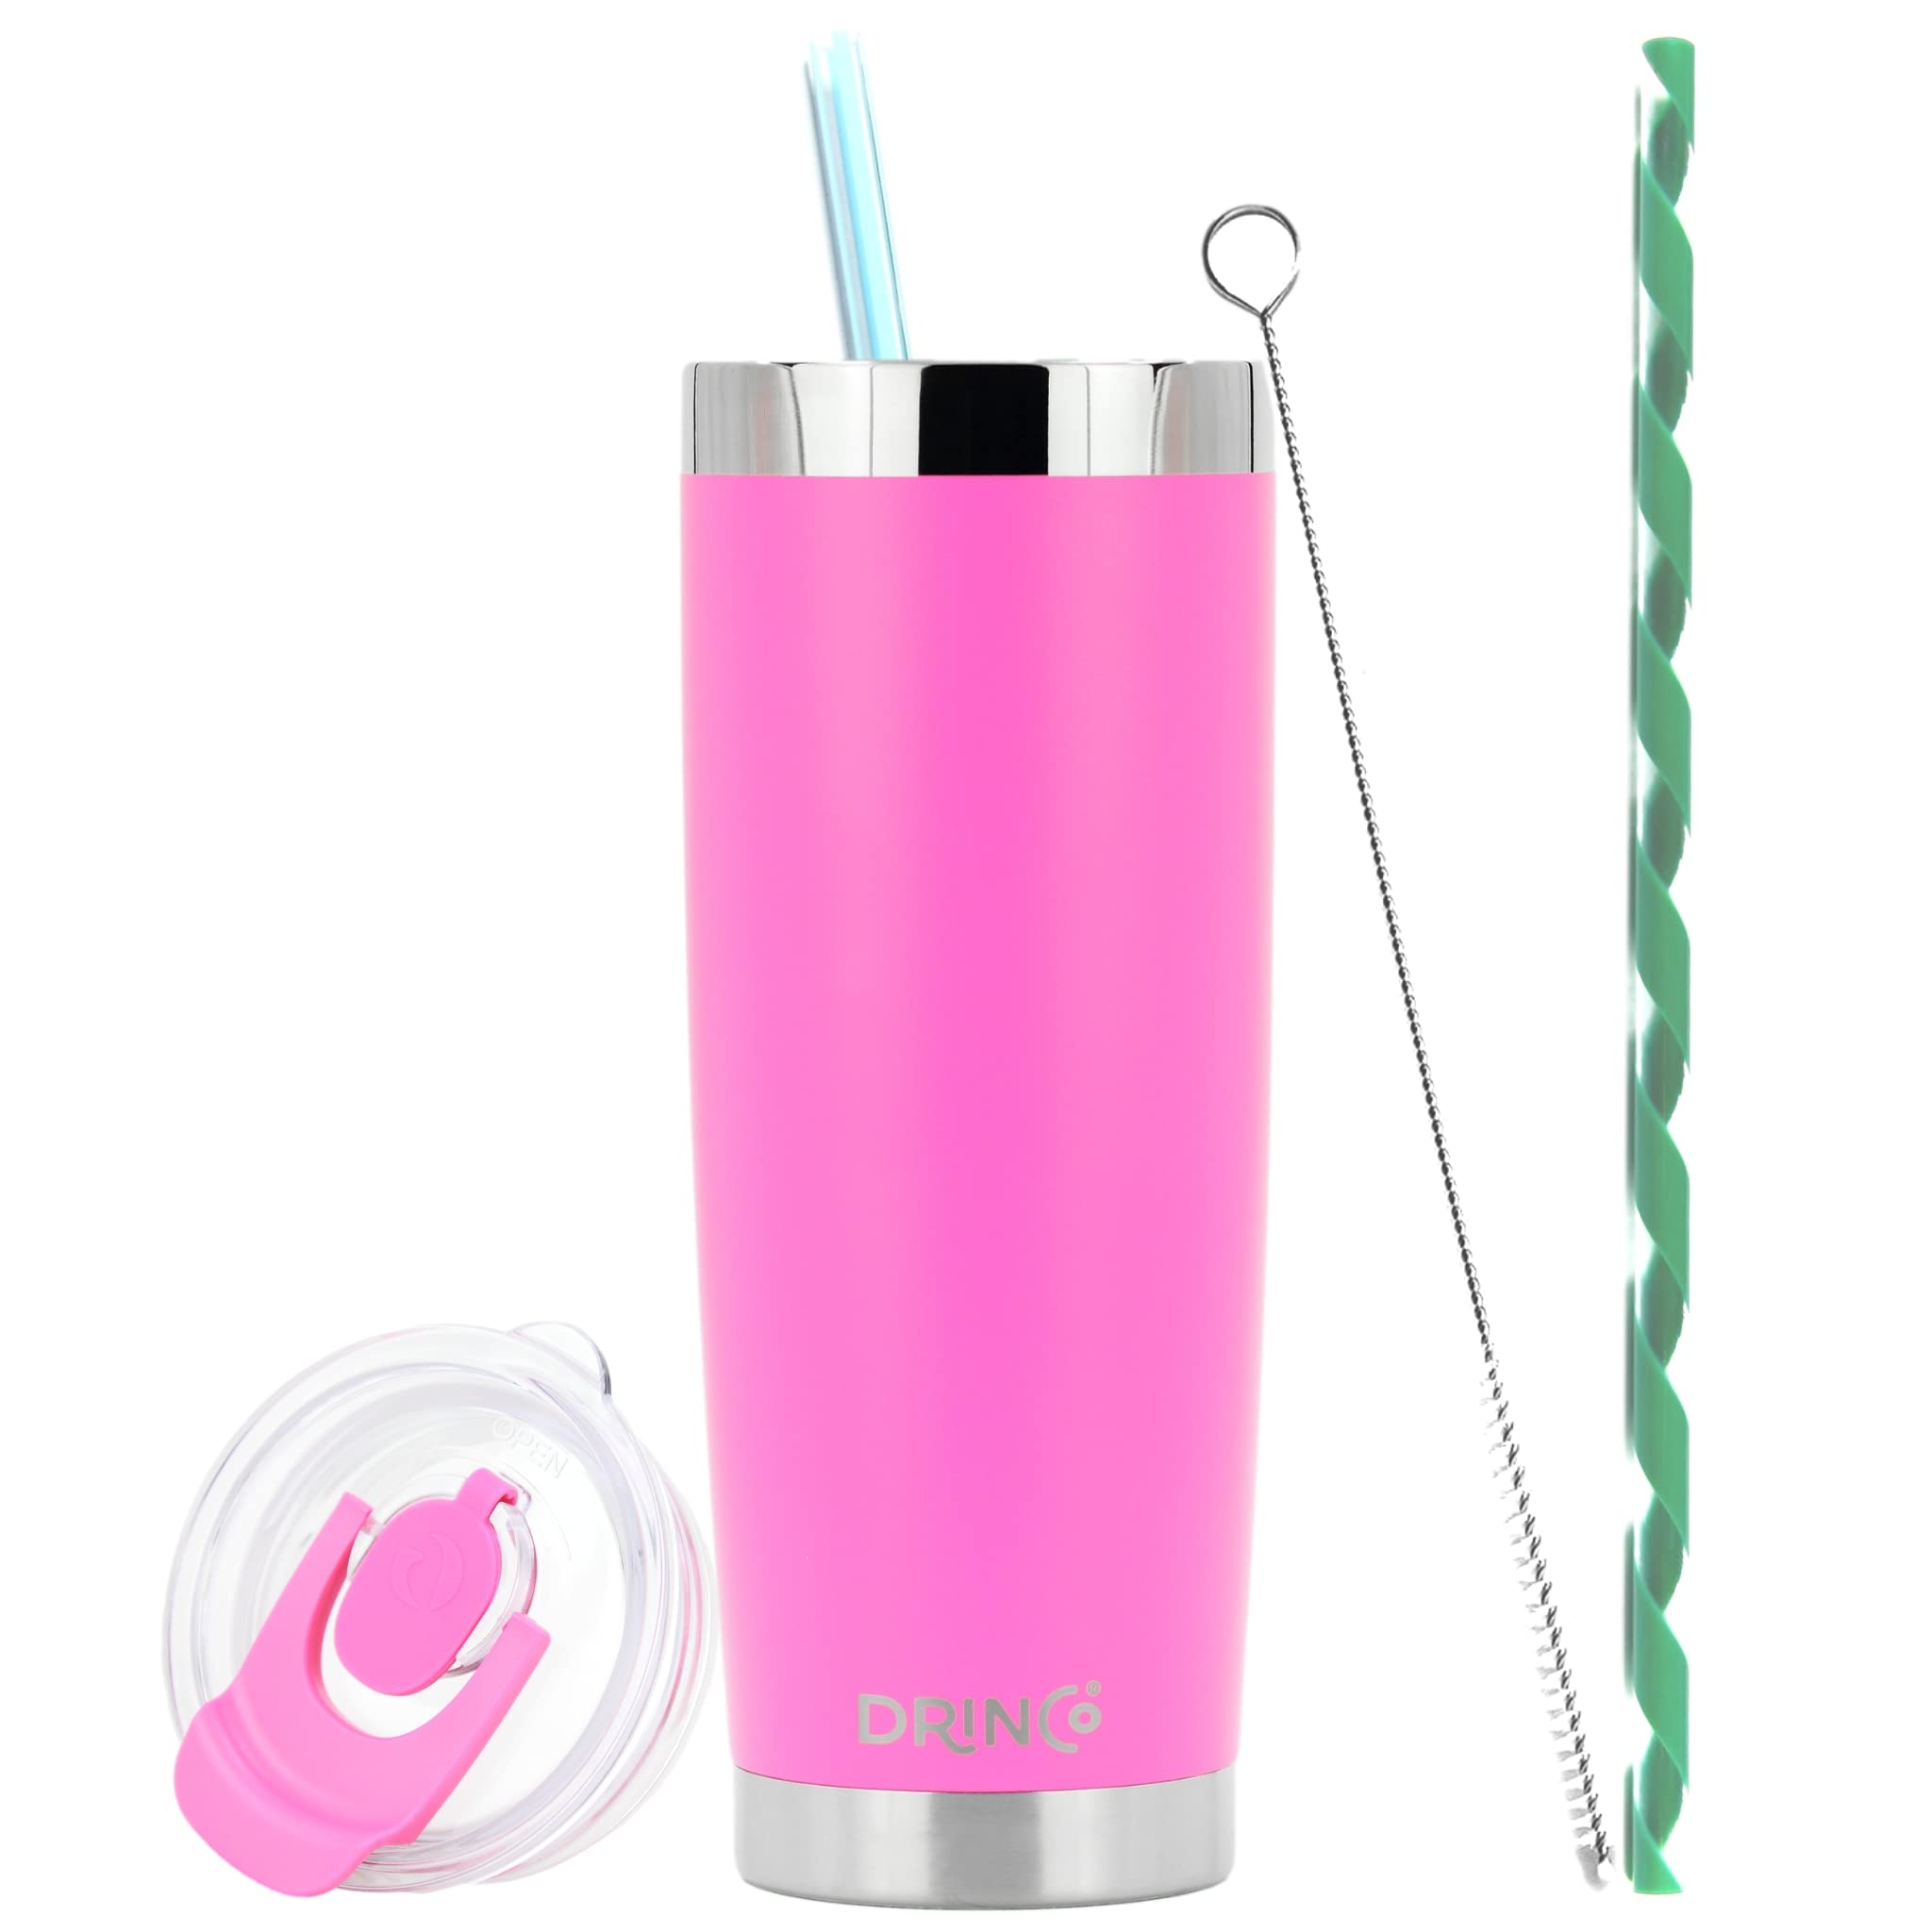 Drinco - 20 oz Stainless Steel Tumbler | Double Walled Vacuum Insulated Mug With Lid, 2 Straws, For Hot & Cold Drinks (20oz, 20oz Island Pink)